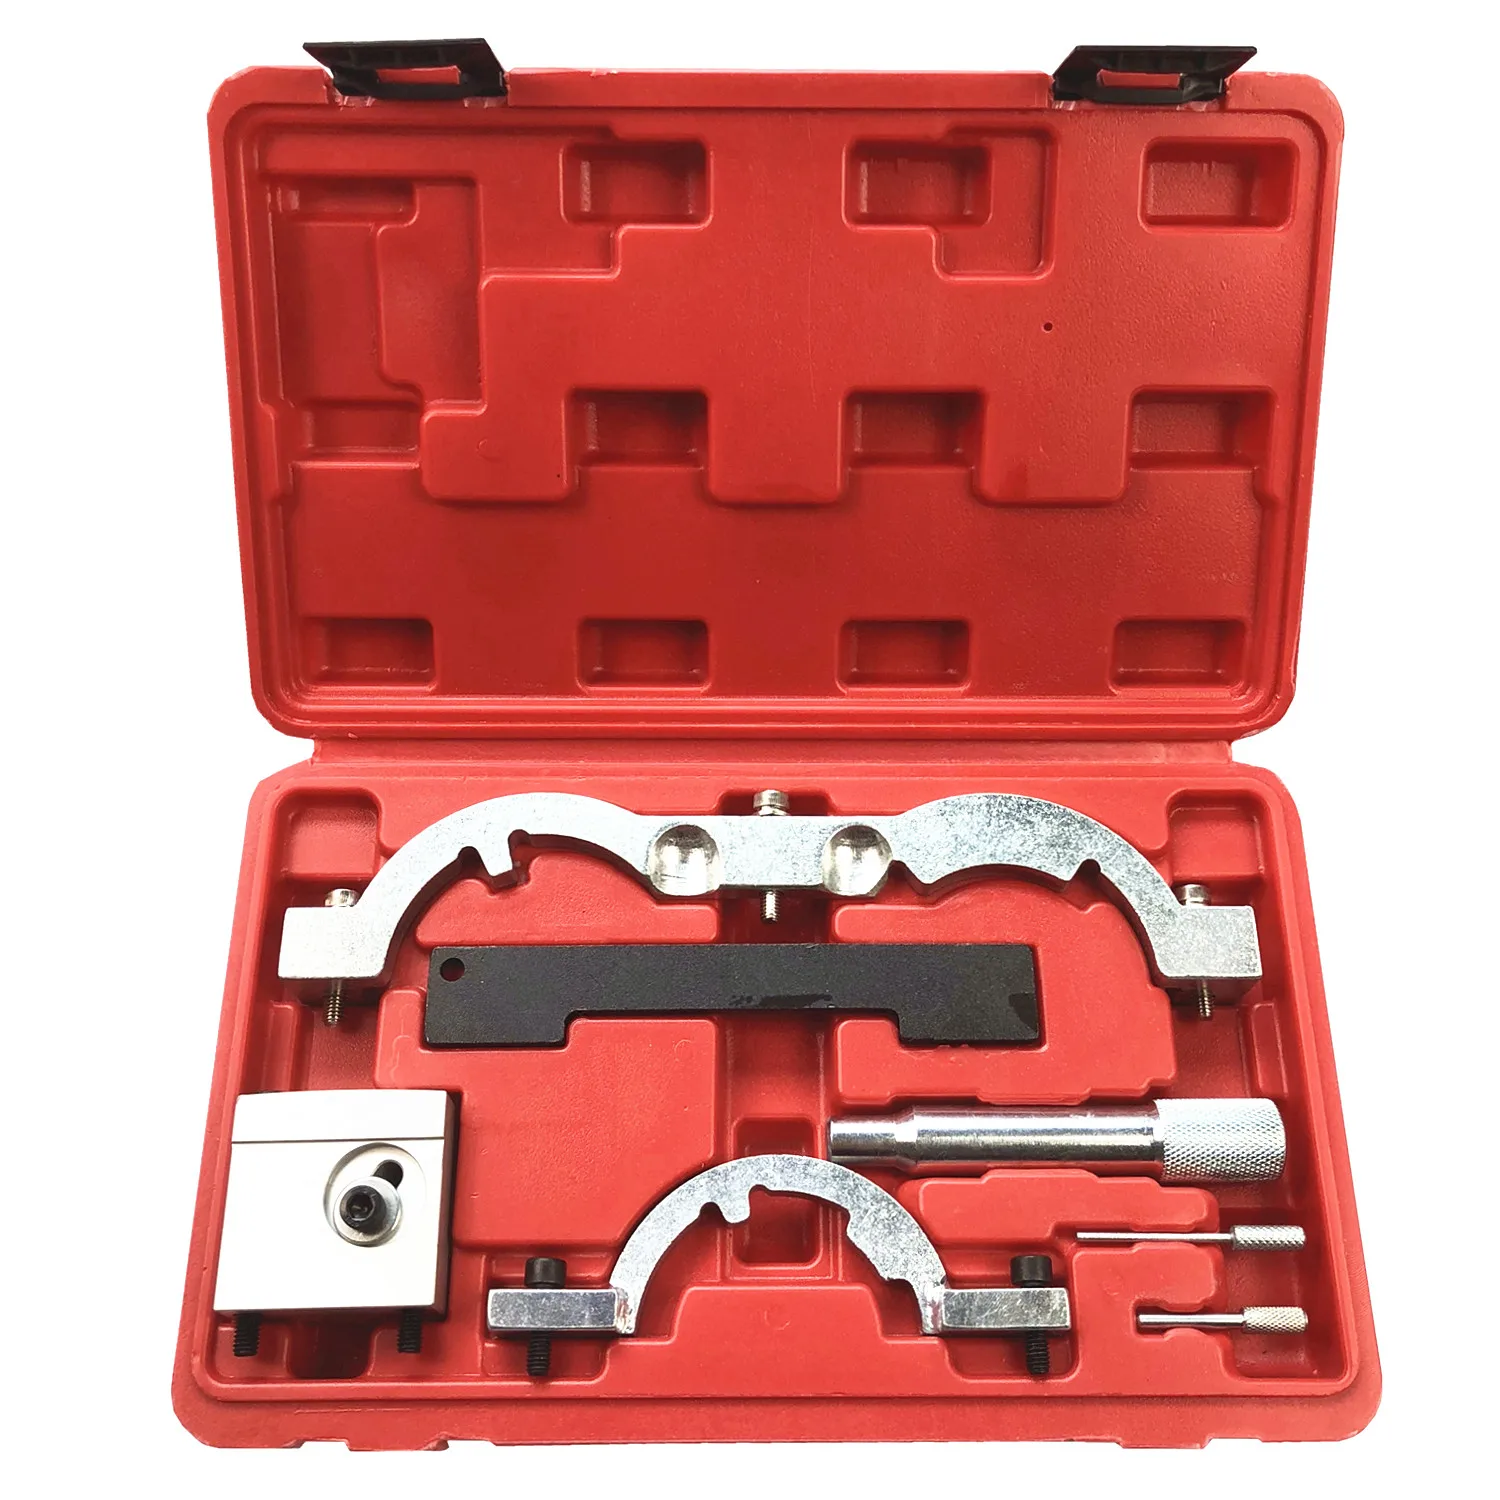 960 S40 Automobile Timing Belt Timing Alignment Locking Tool Comprehensive 45# Steel Car Engine Timing Tool Fit for 850 Car Engine Crankshaft Alignment Timing Locking Timing Belt Tool S70 etc. 